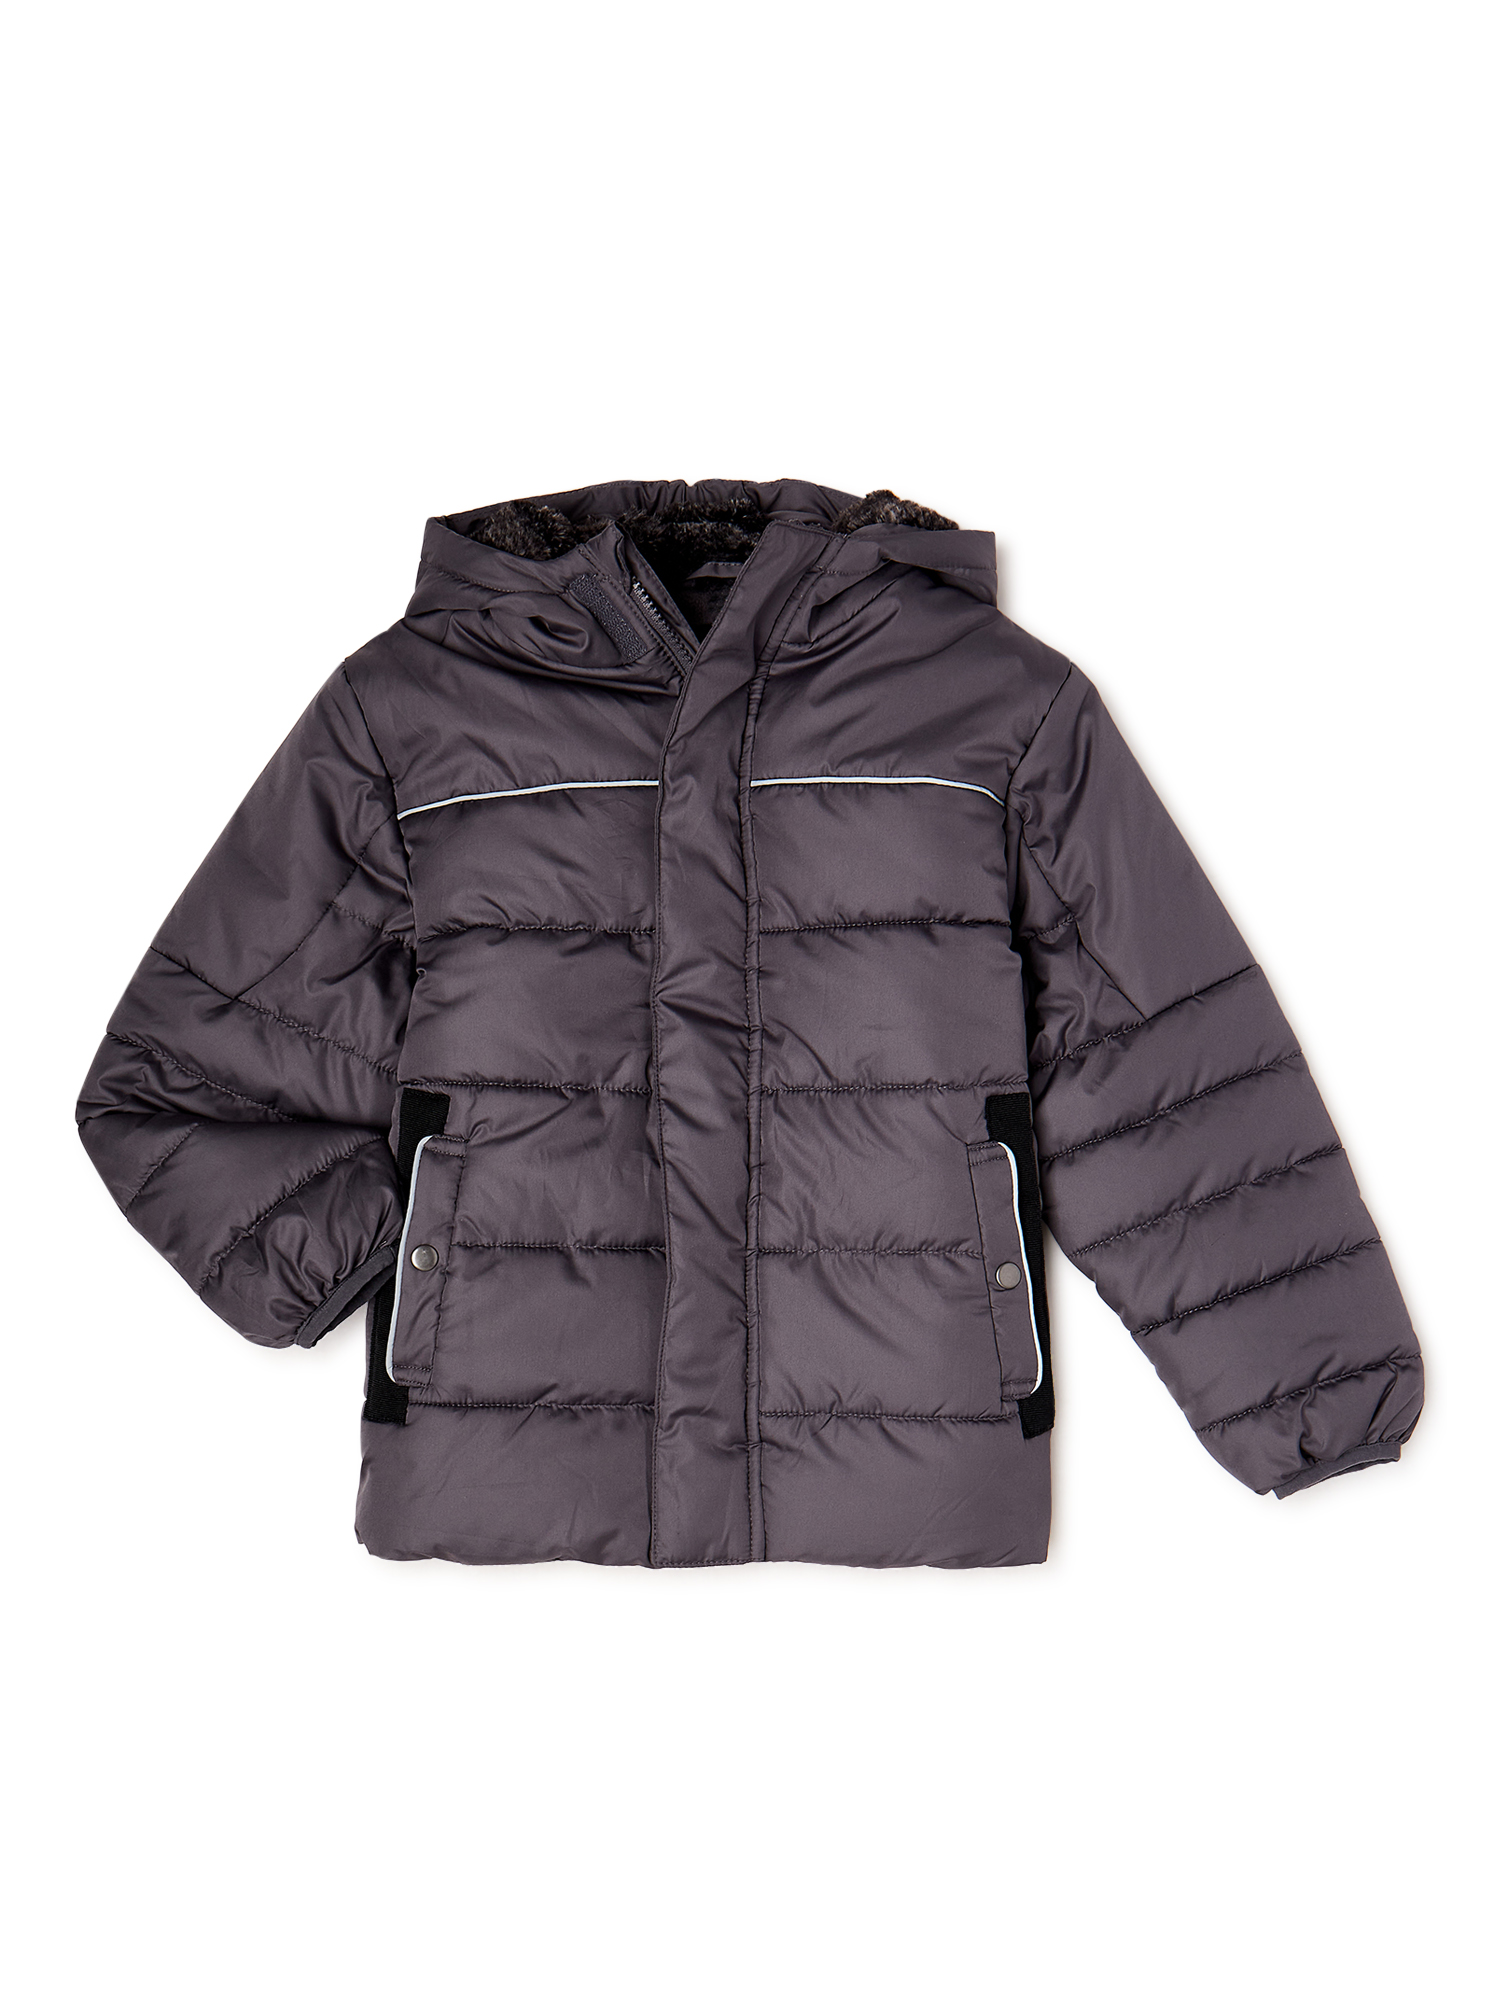 Swiss Tech Boys' Puffer Jacket with Hood, Sizes 4-18 - image 1 of 3